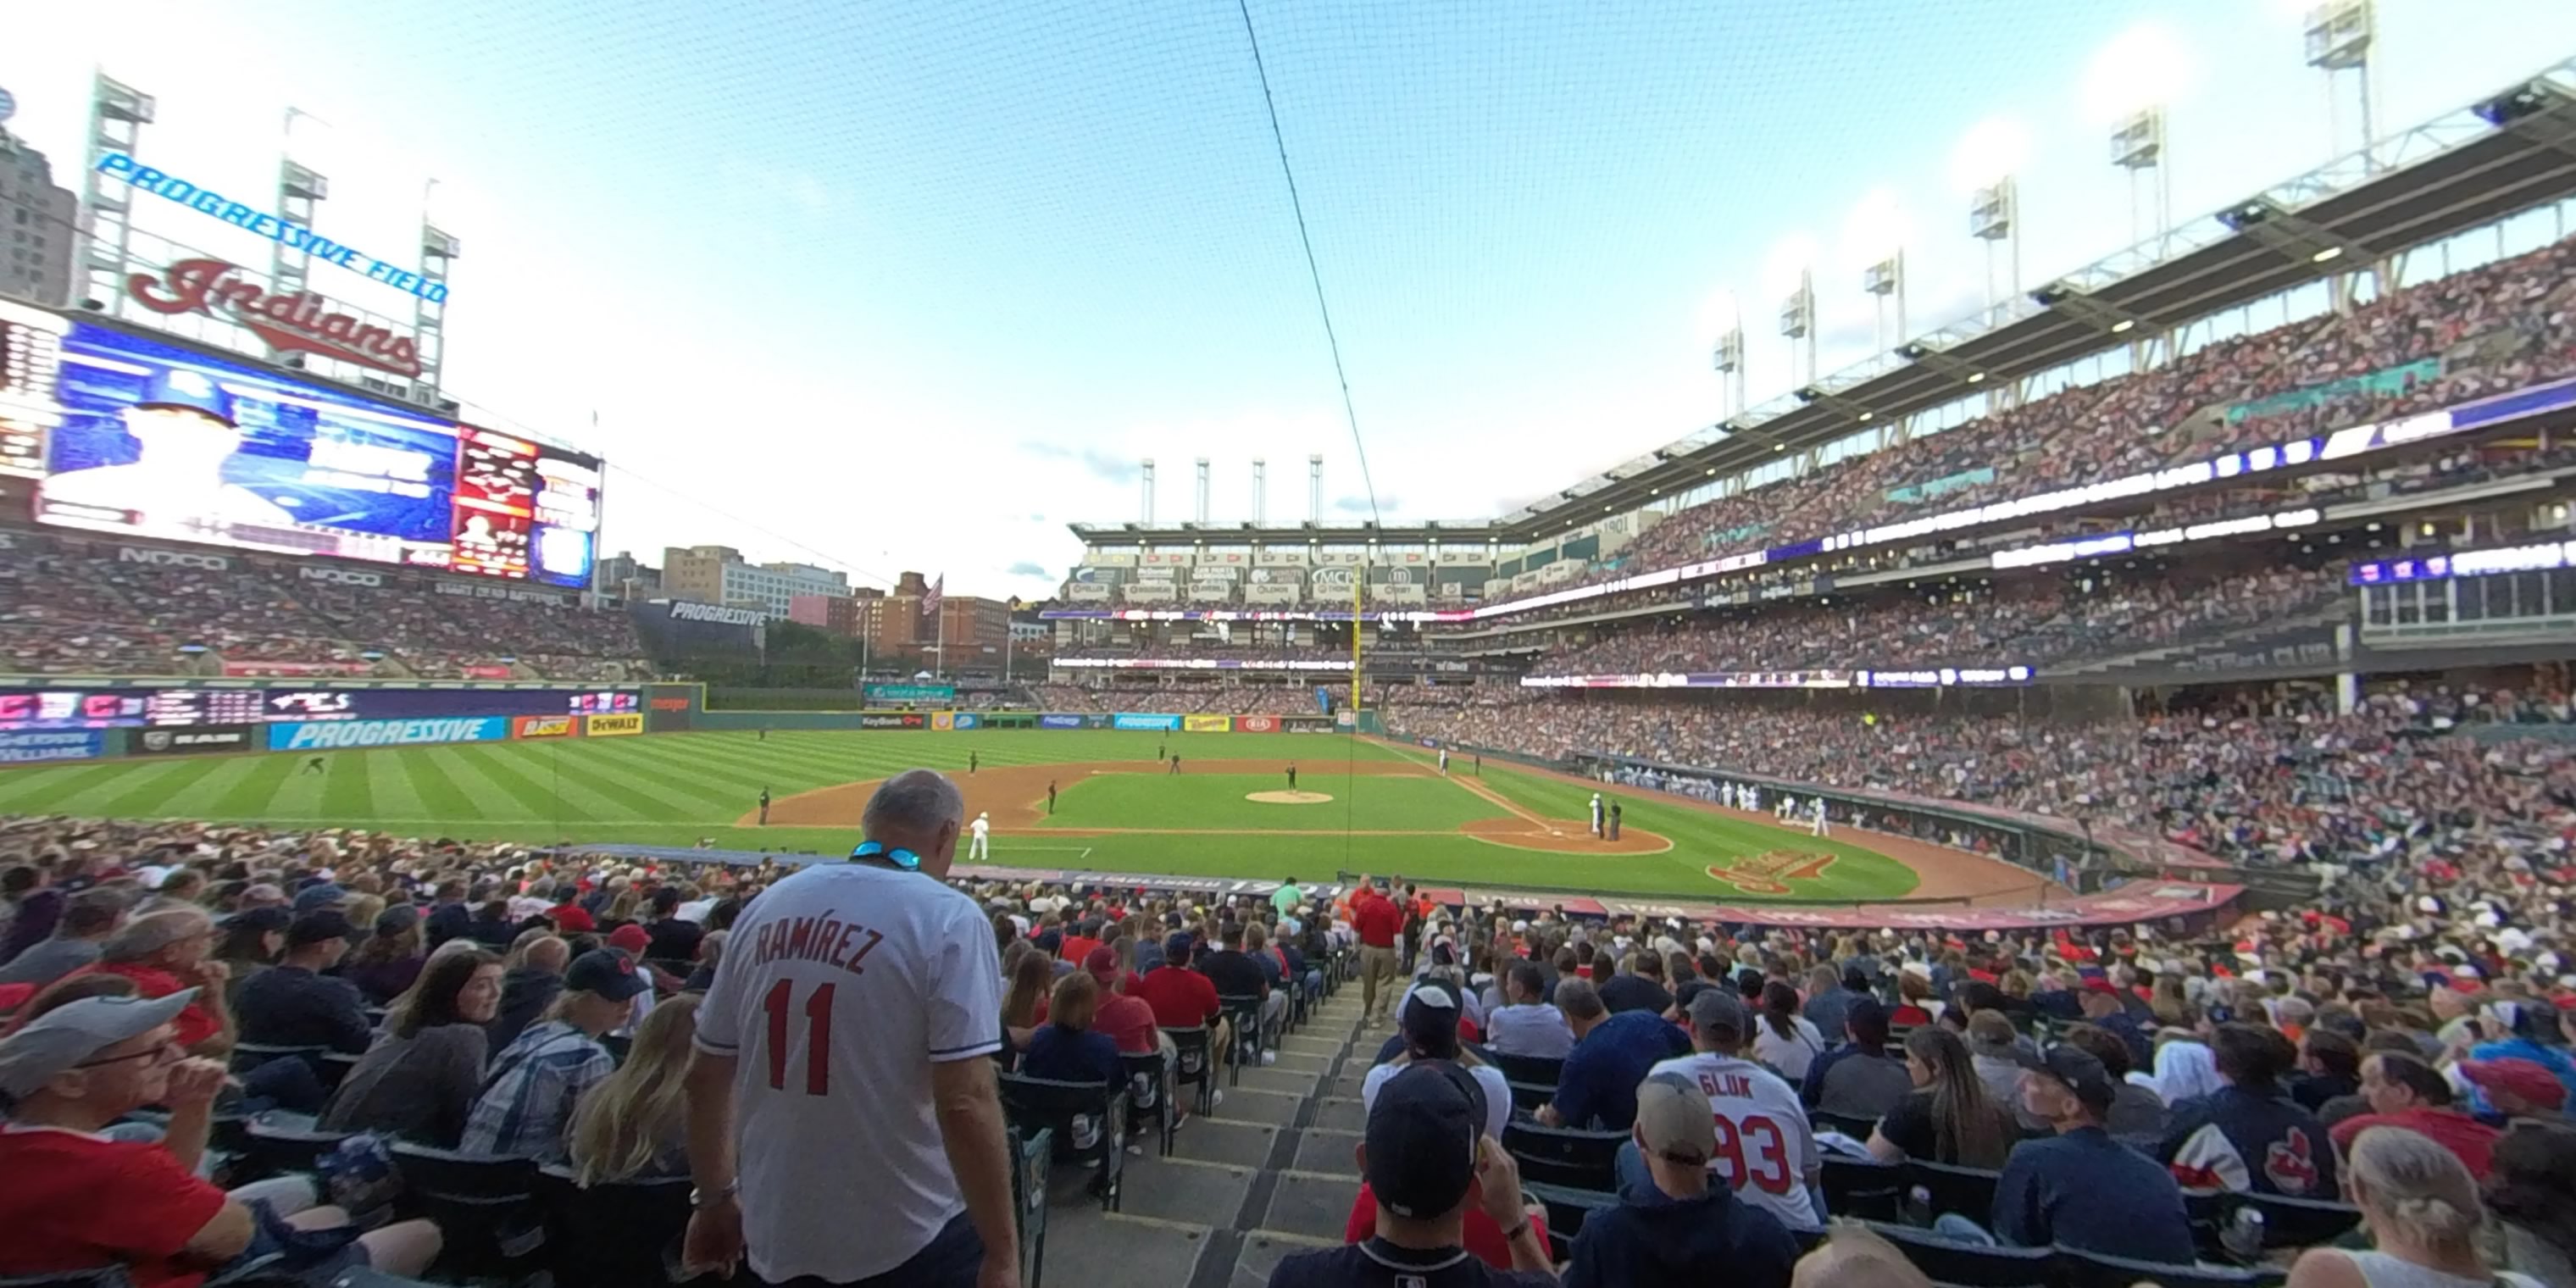 section 159 panoramic seat view  - progressive field